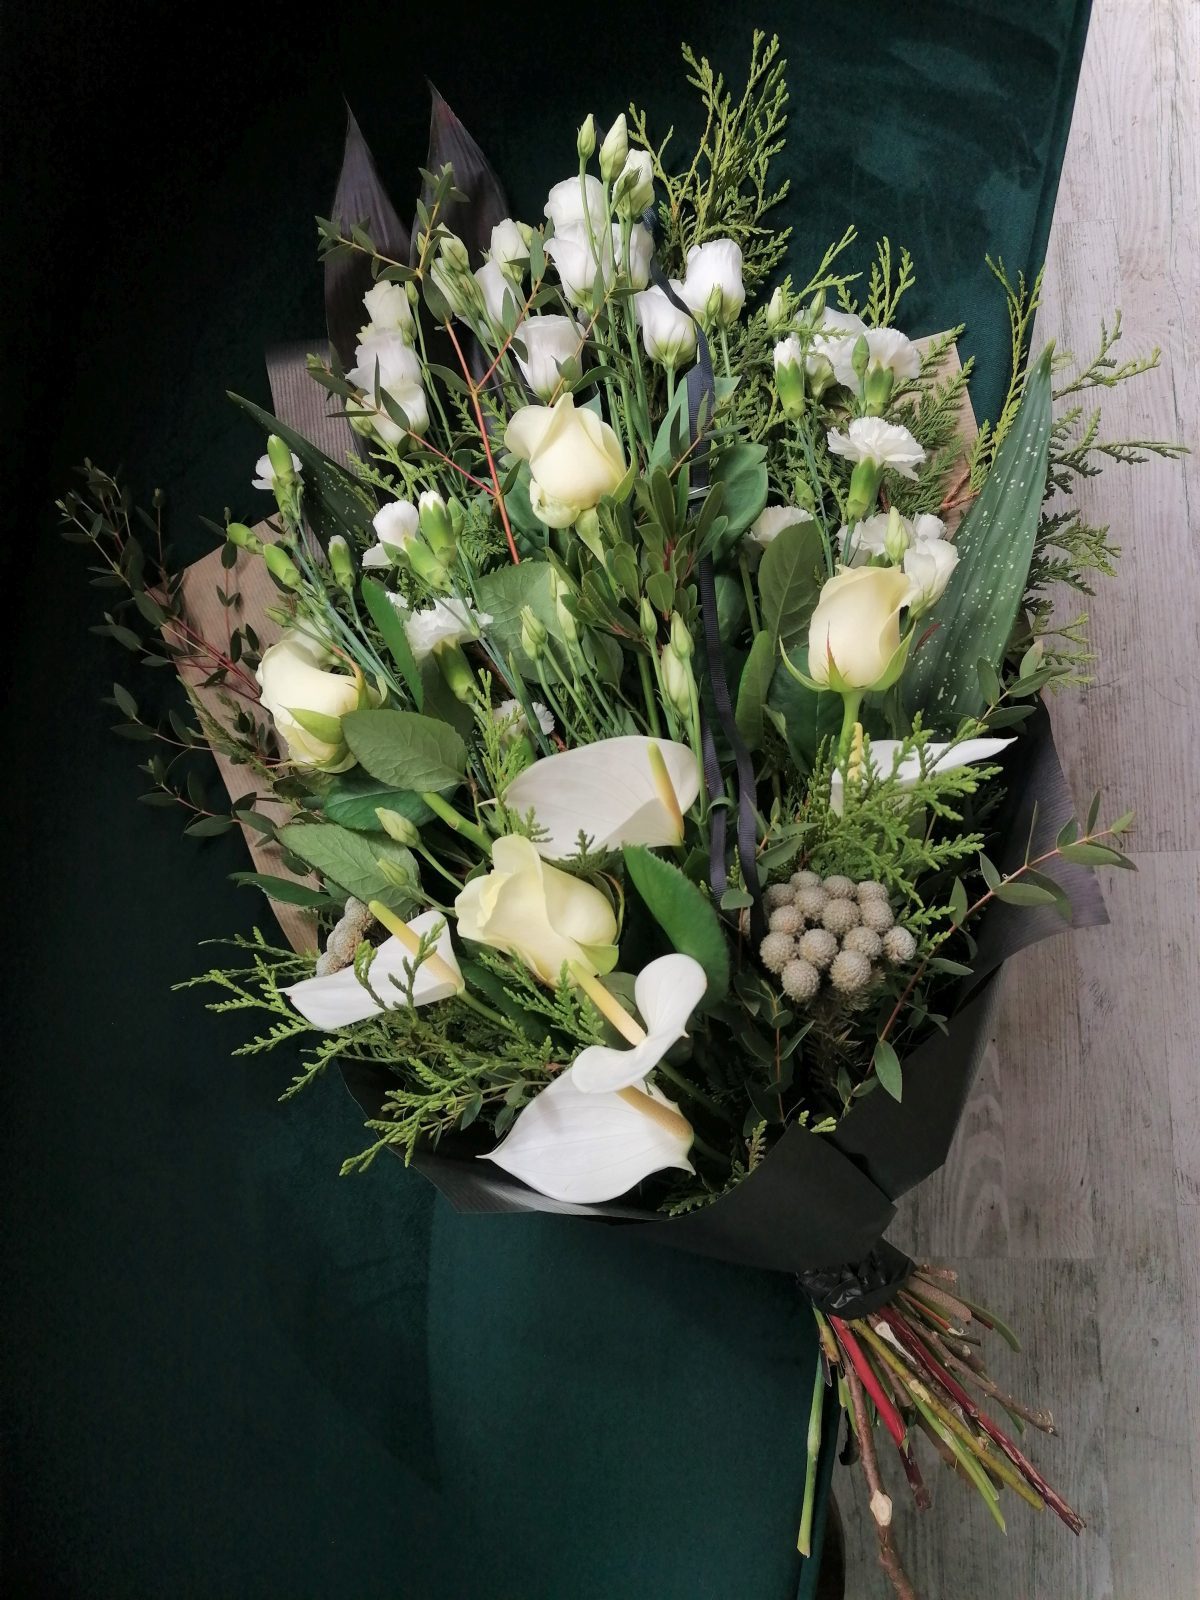 Multispecies using: eustoma, carnations, roses, anthurium, brunia. Flowers arranged in the form of a bouquet to be assembled, in a light and handy form